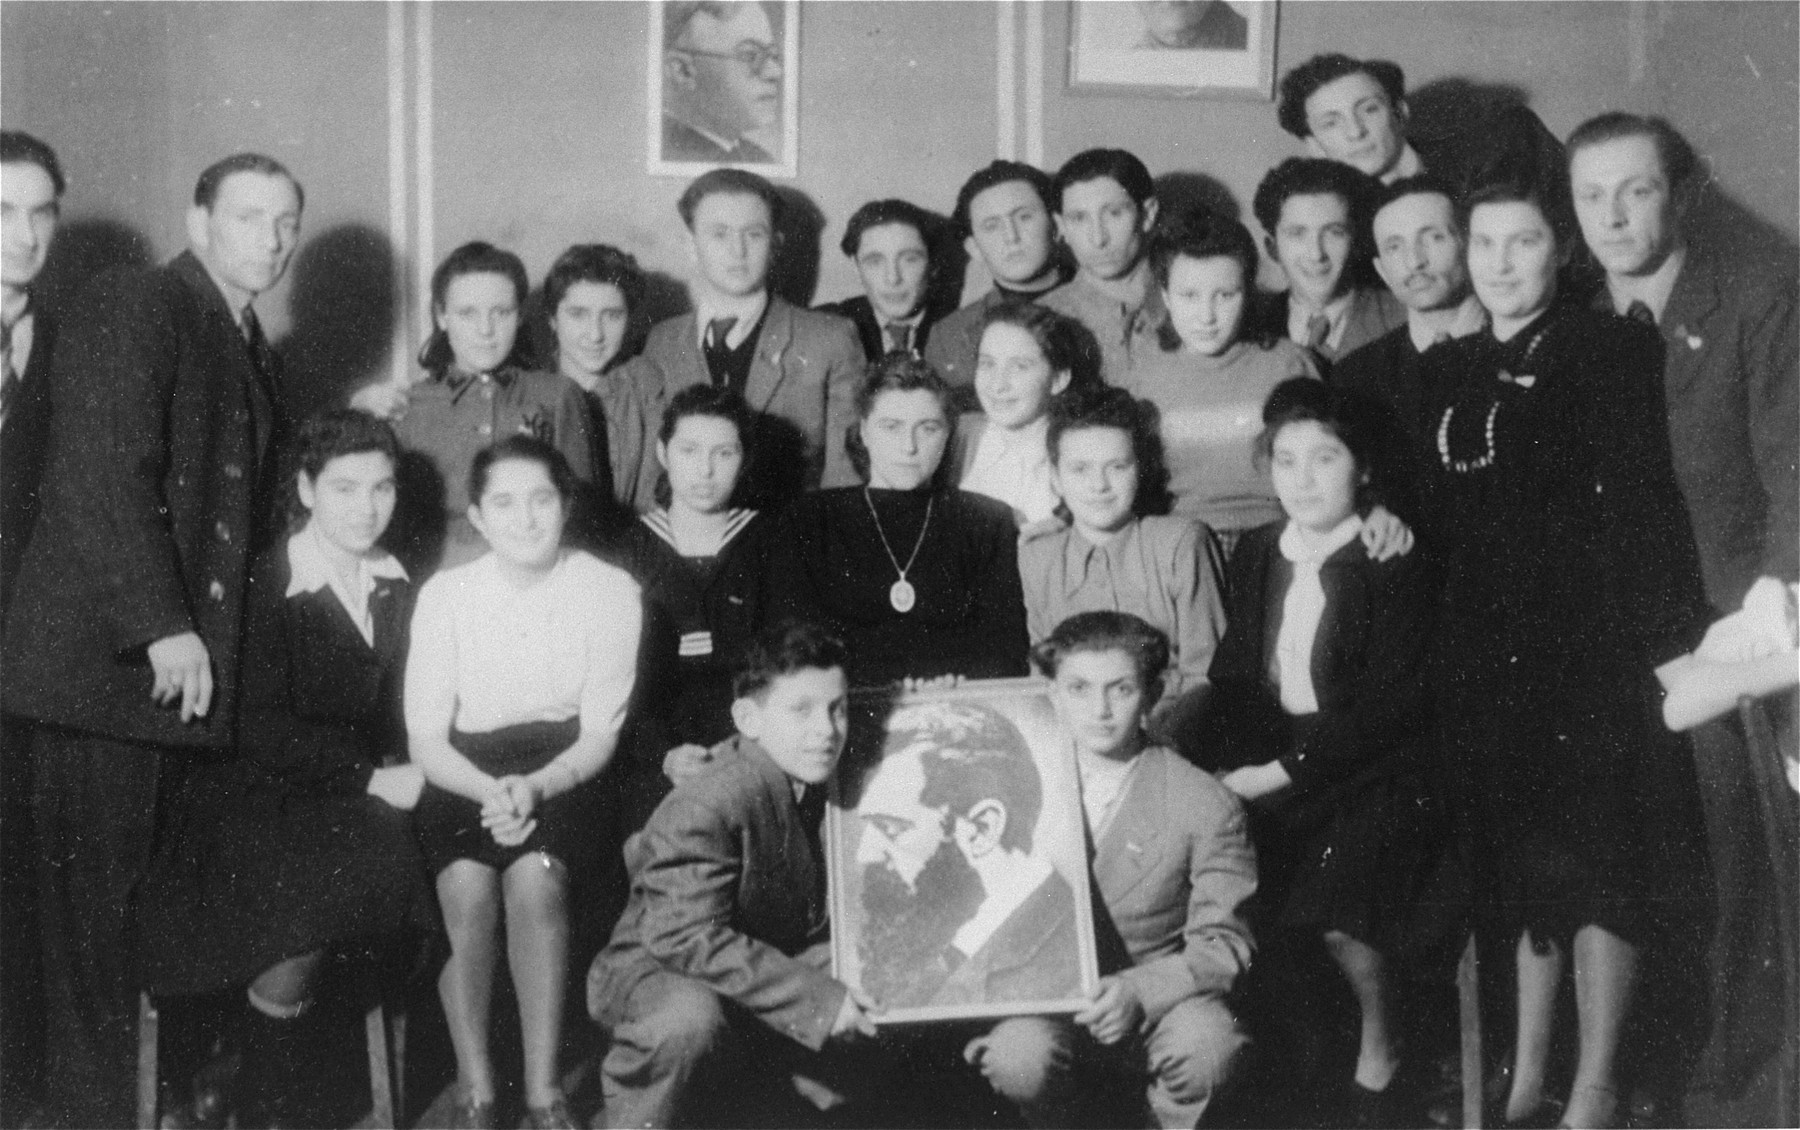 Members of Betar pose with a portrait of Theodor Herzl in the Schlachtensee displaced persons camp.  

Pictured are the Zycer brothers, Icka Lewin, Mishka Gleiberman, Yurek Snyder, Leizer Snyder, and Murka Bimbad.